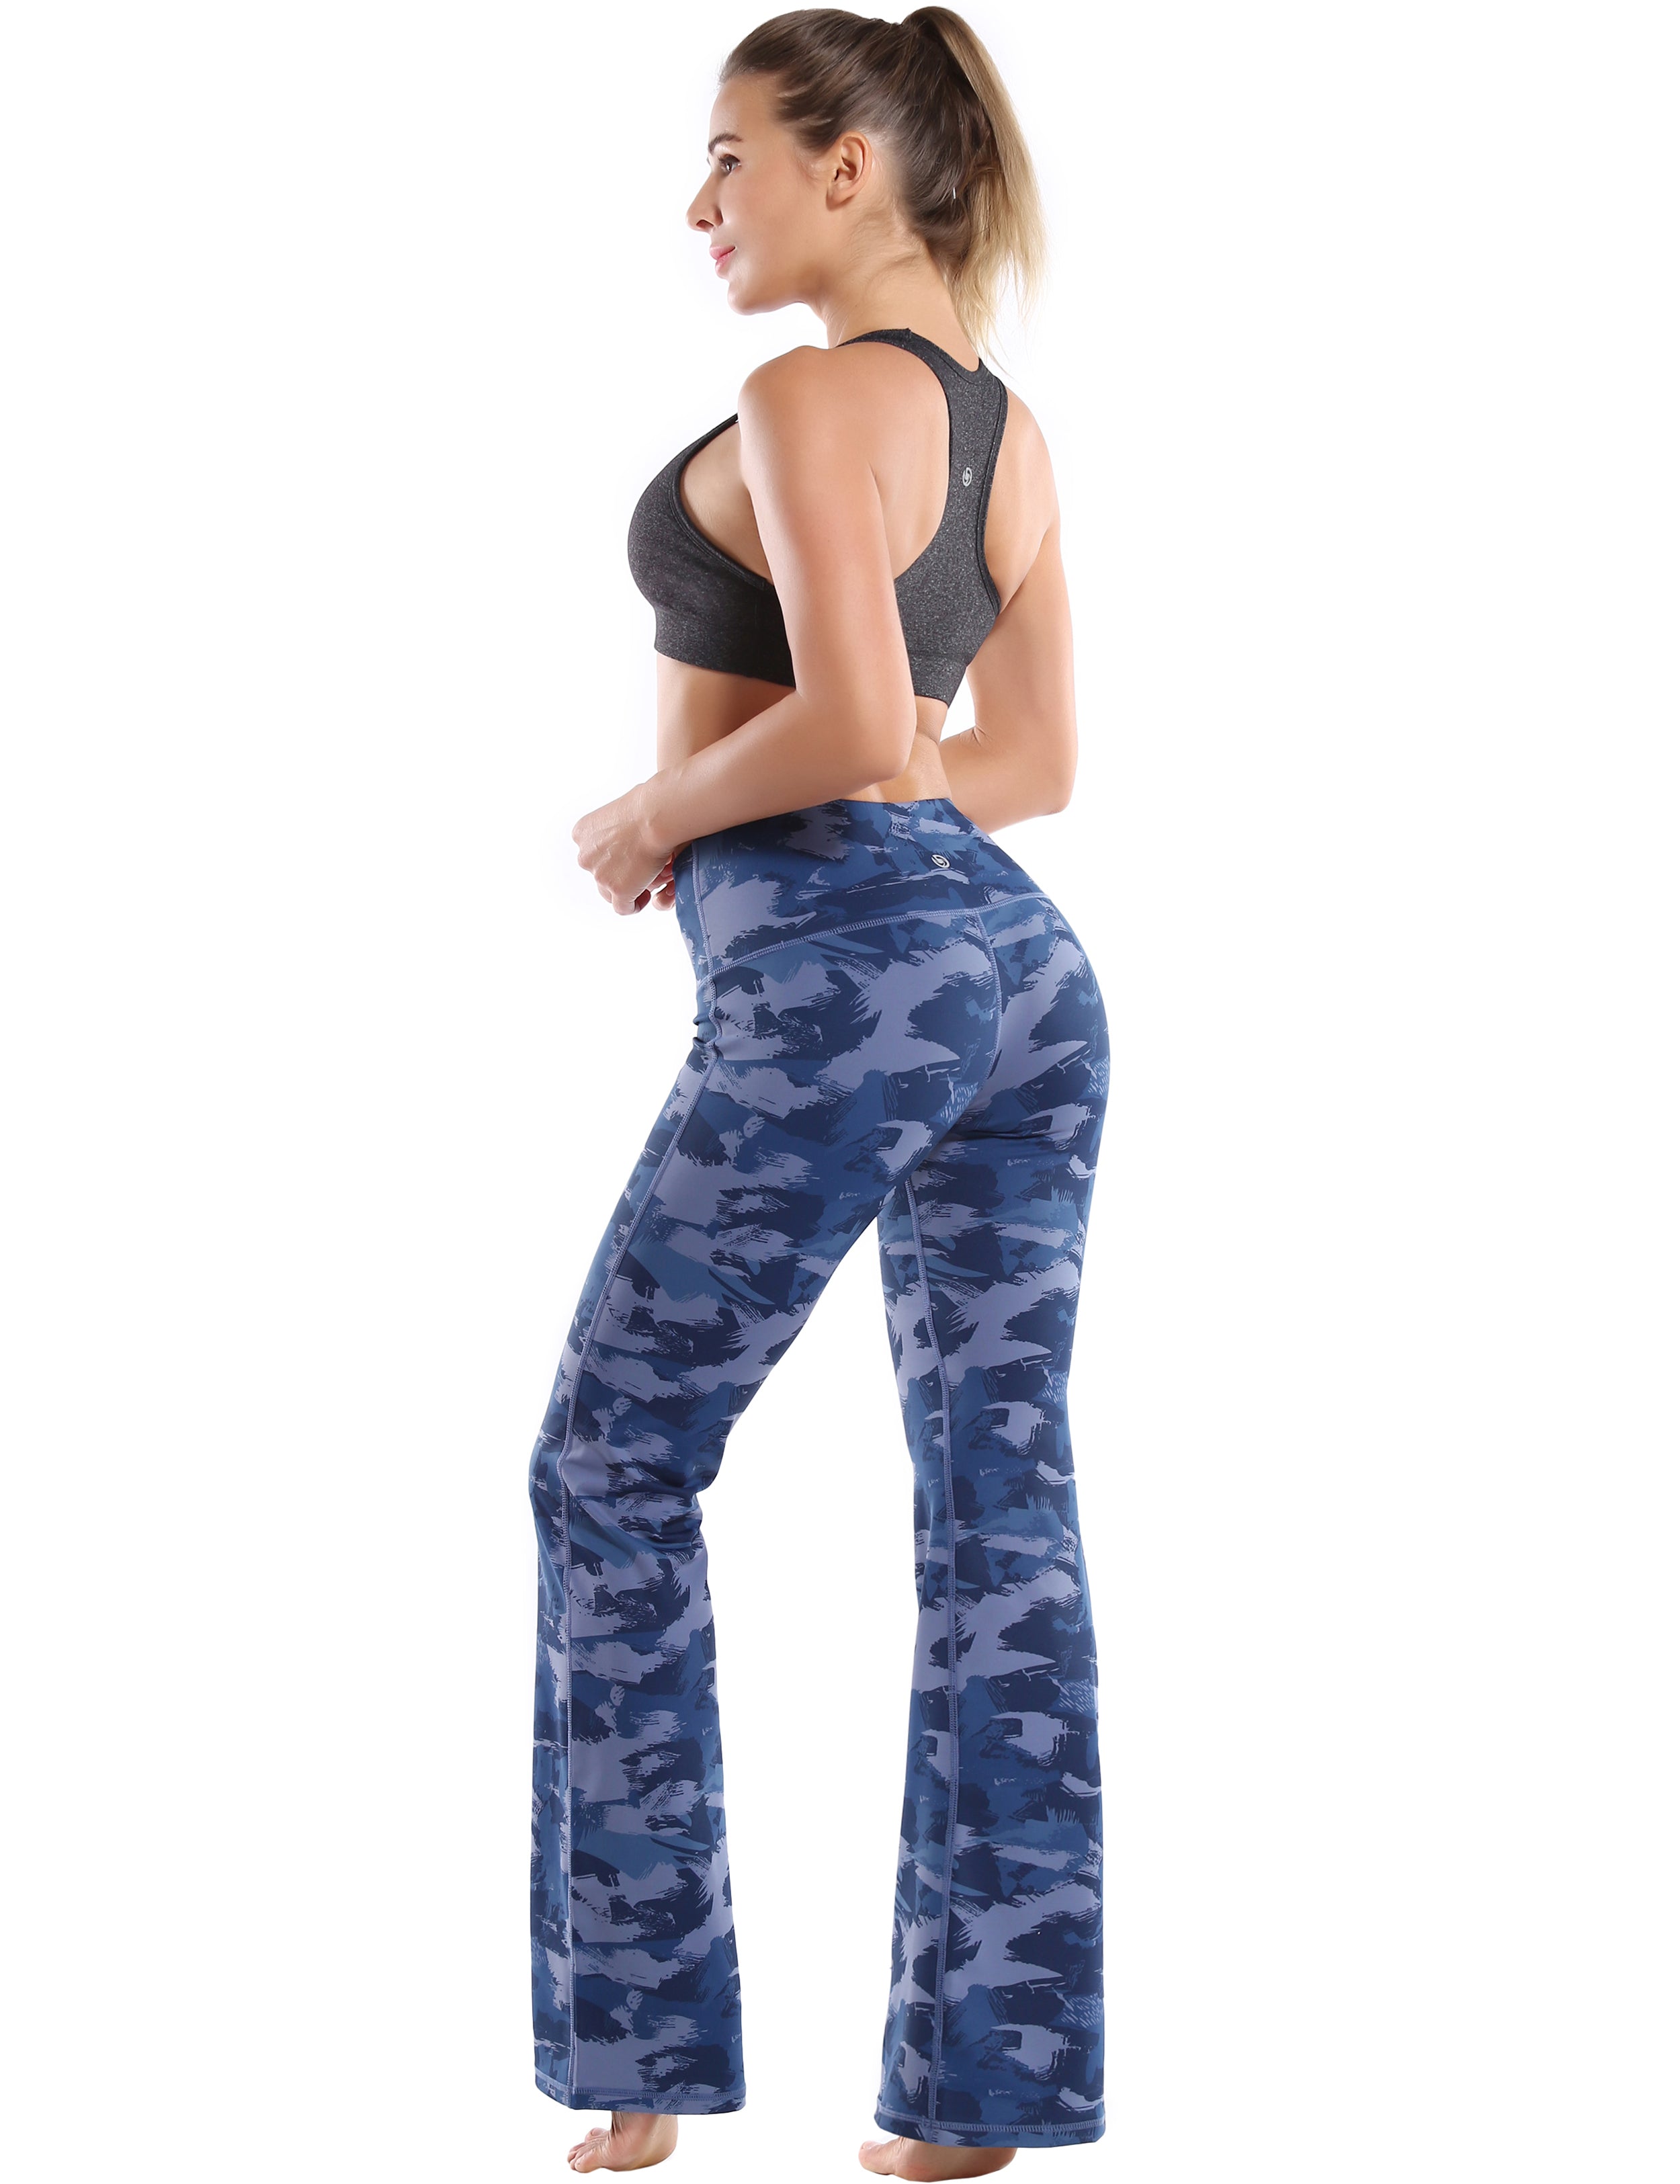 High Waist Printed Bootcut Leggings navy brushcamo 78%Polyester/22%Spandex Fabric doesn't attract lint easily 4-way stretch No see-through Moisture-wicking Tummy control Inner pocket Five lengths